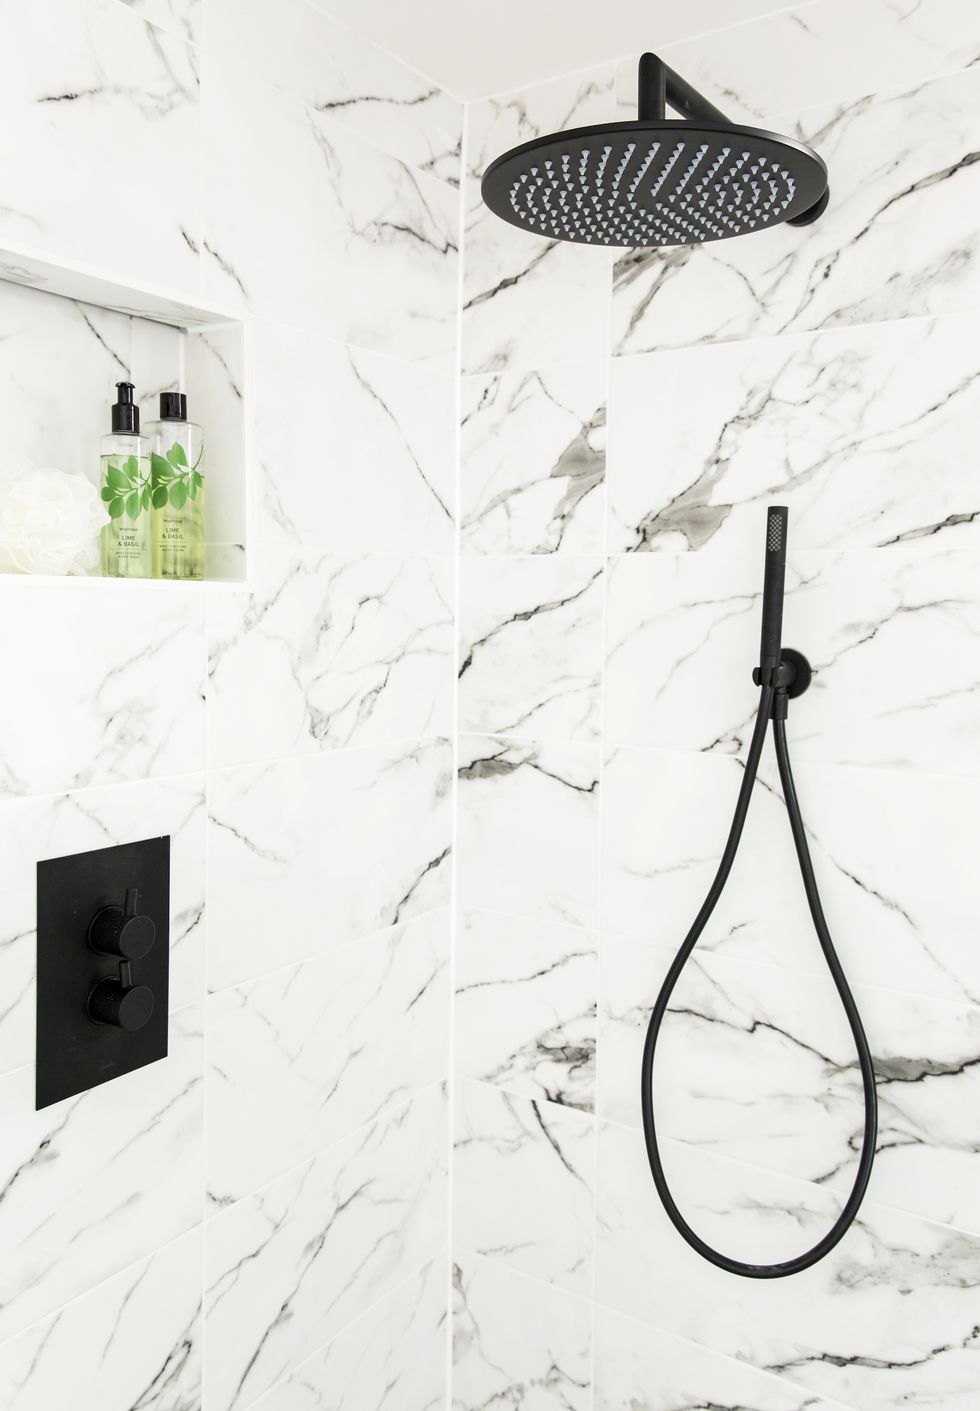 black shower head and fittings on a marble effect tiled wallshowerthe new concealed black shower made use of the existing boxed in pipework for a sleek,streamlined finish